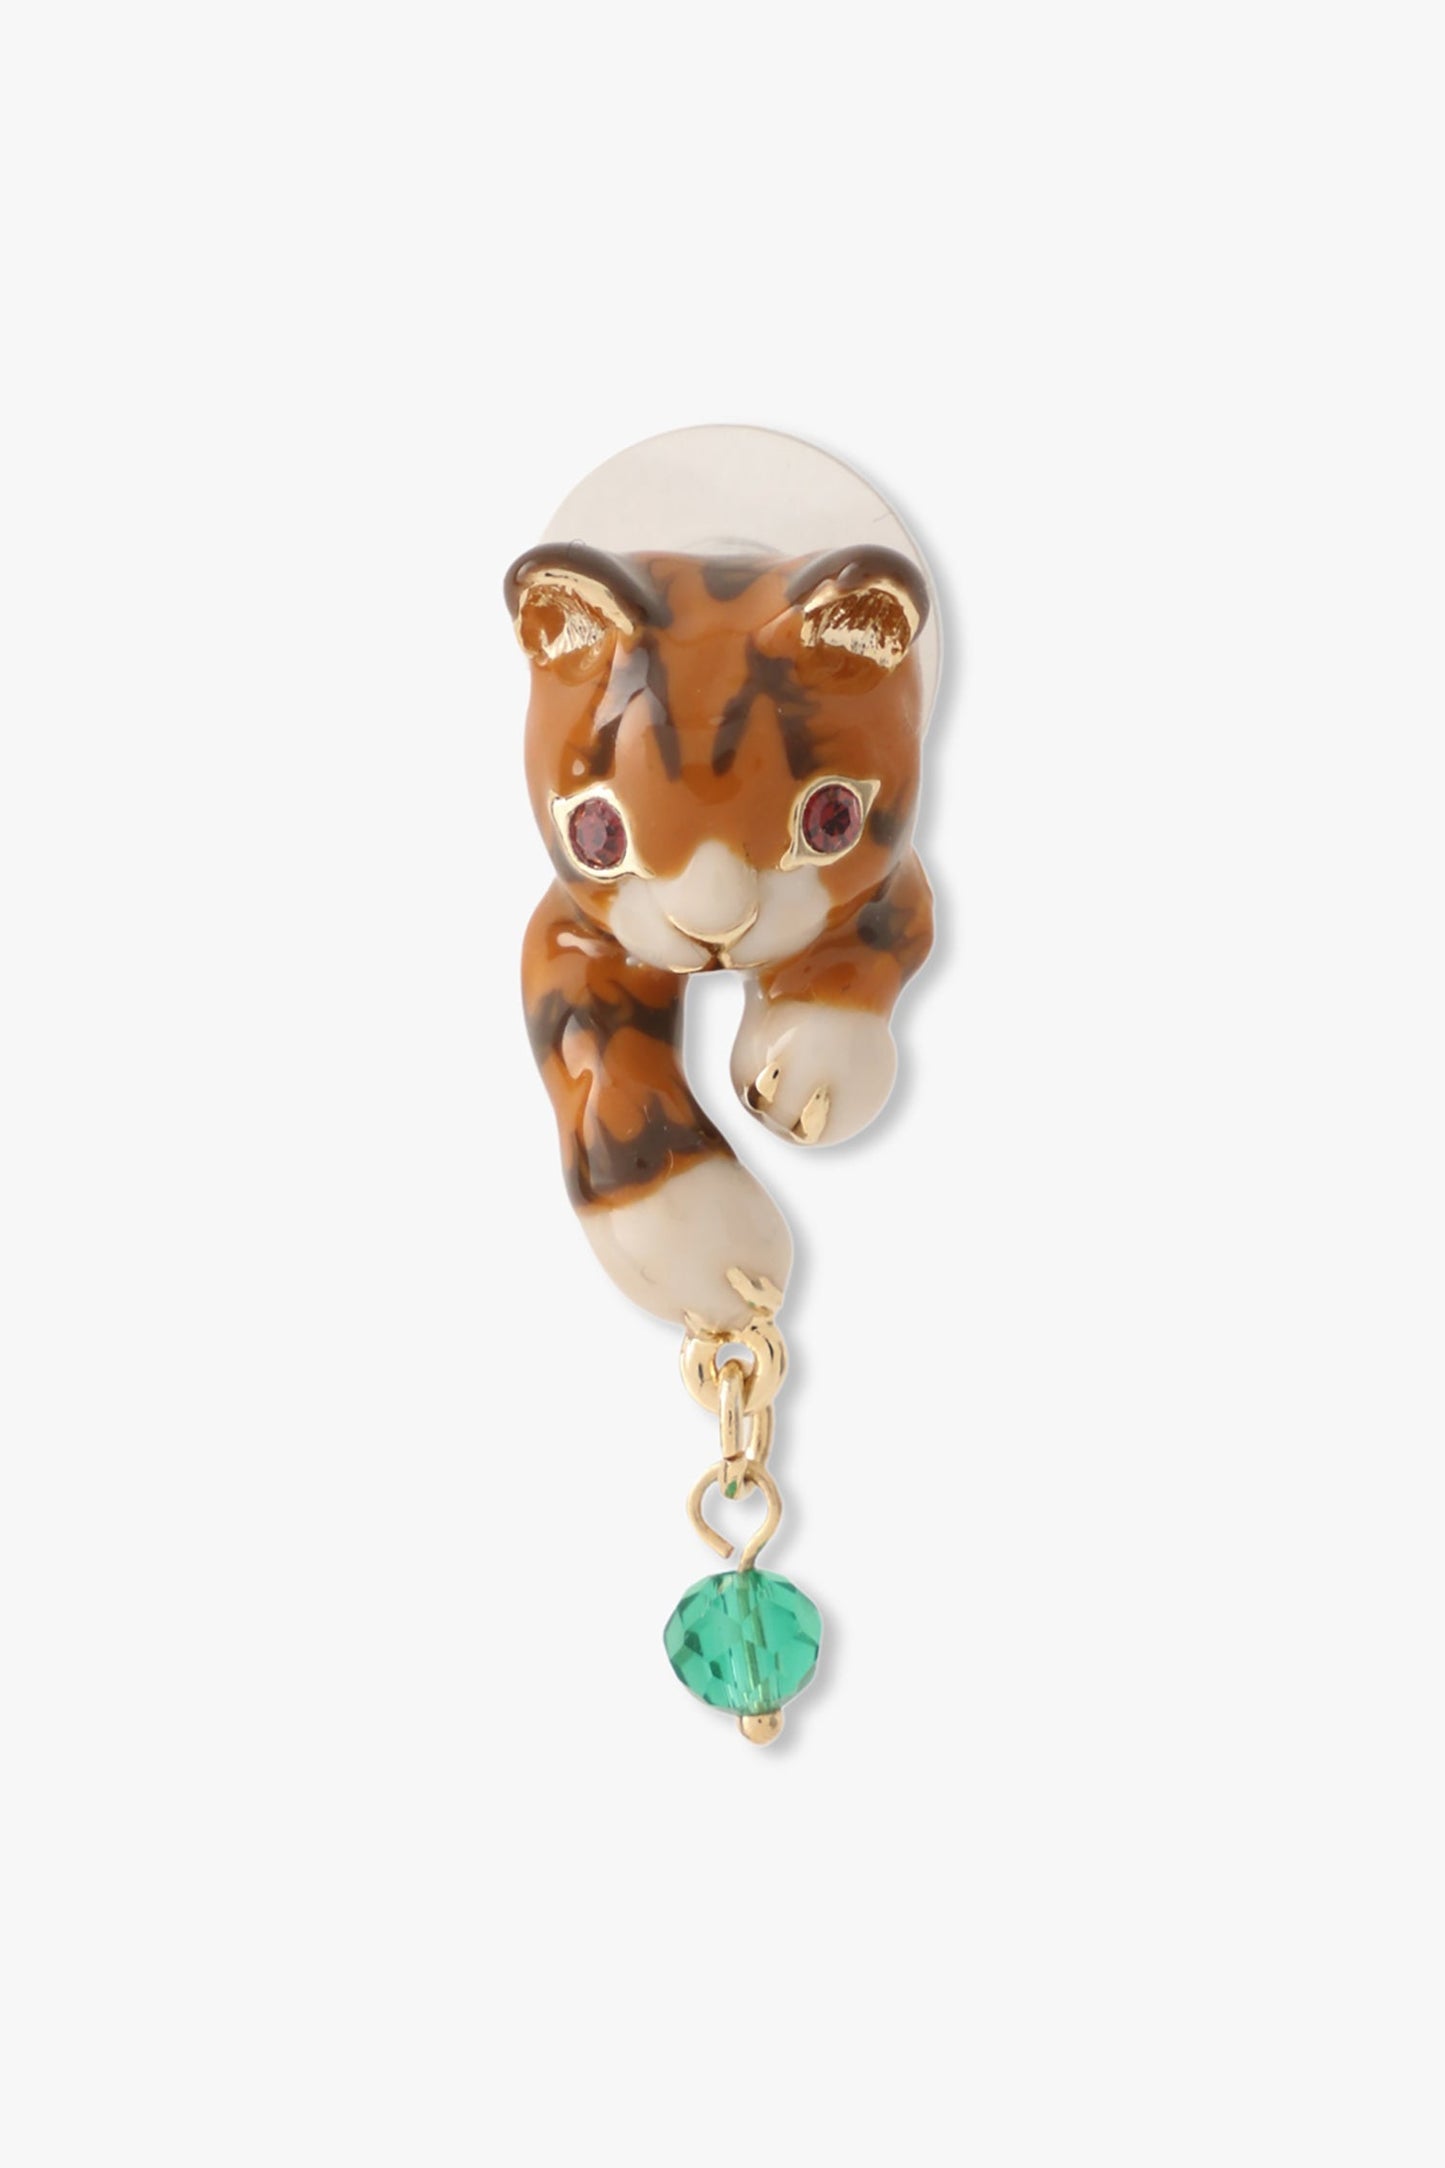 Mismatched Cat Charm Earrings, adorable, brown and playful cat with green hanging gem 